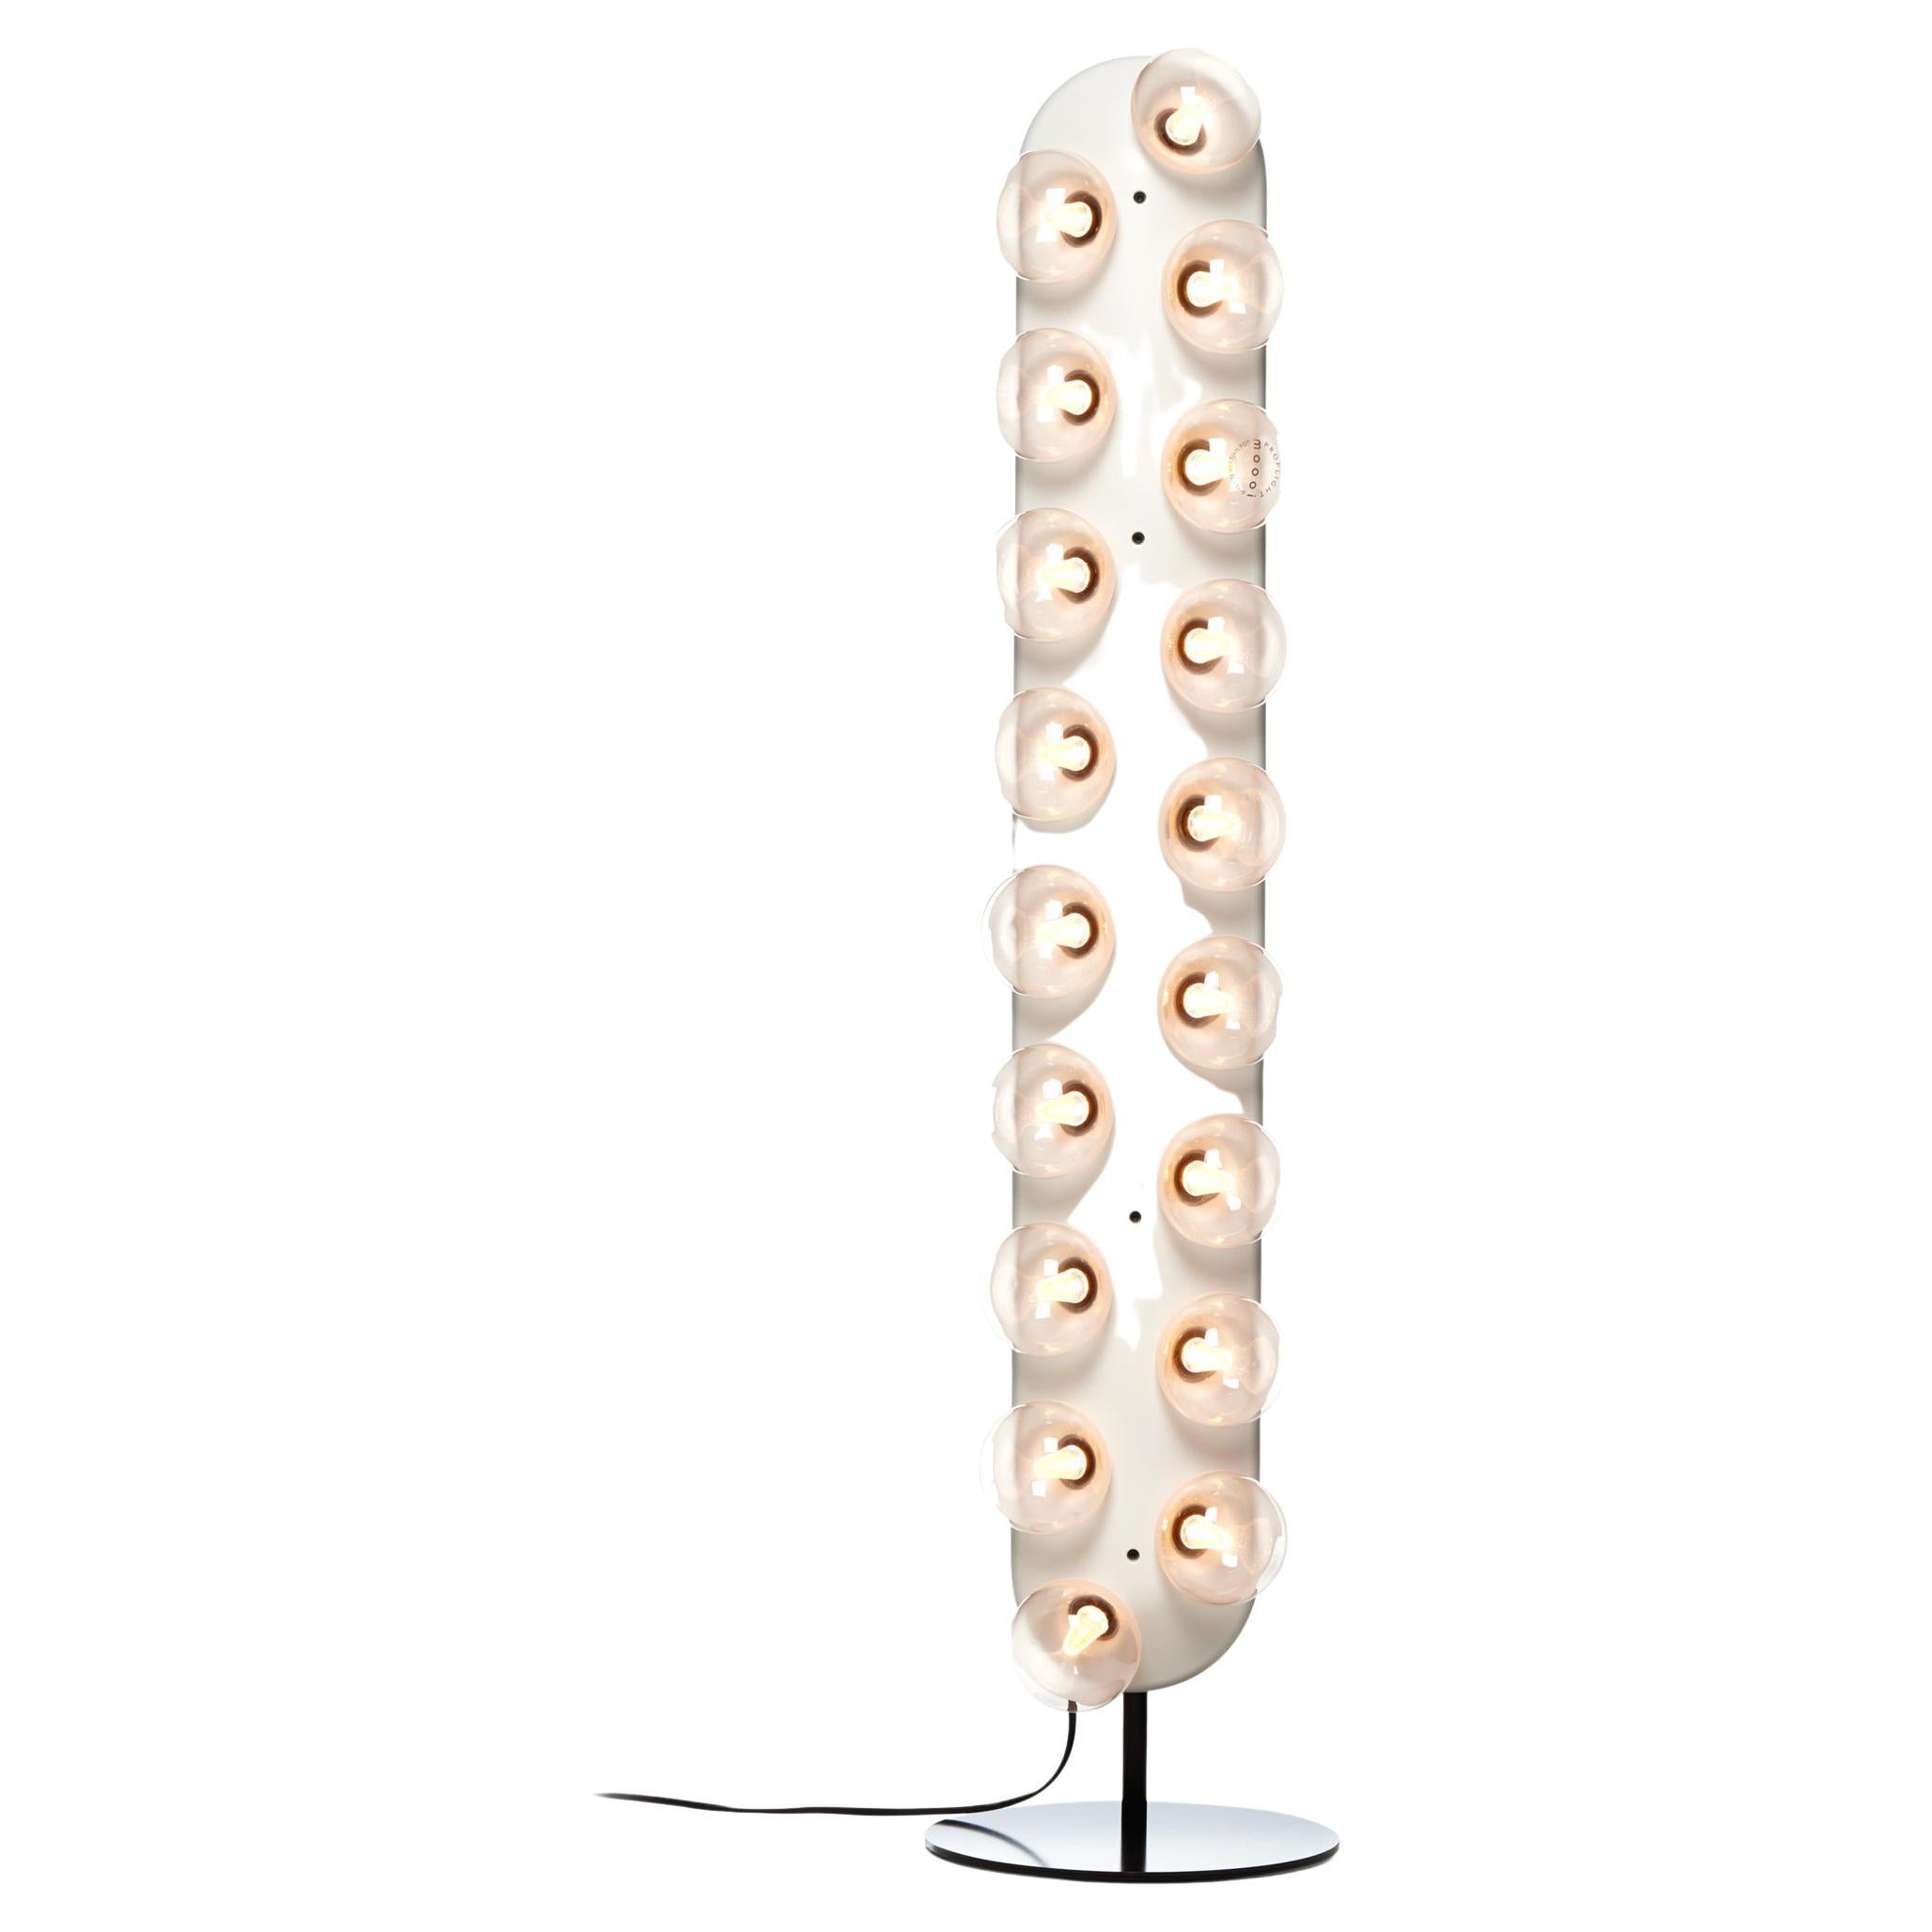 Moooi Prop Light Vertical Floor Lamp with Warm White Glass Bulbs by Bertjan Pot For Sale